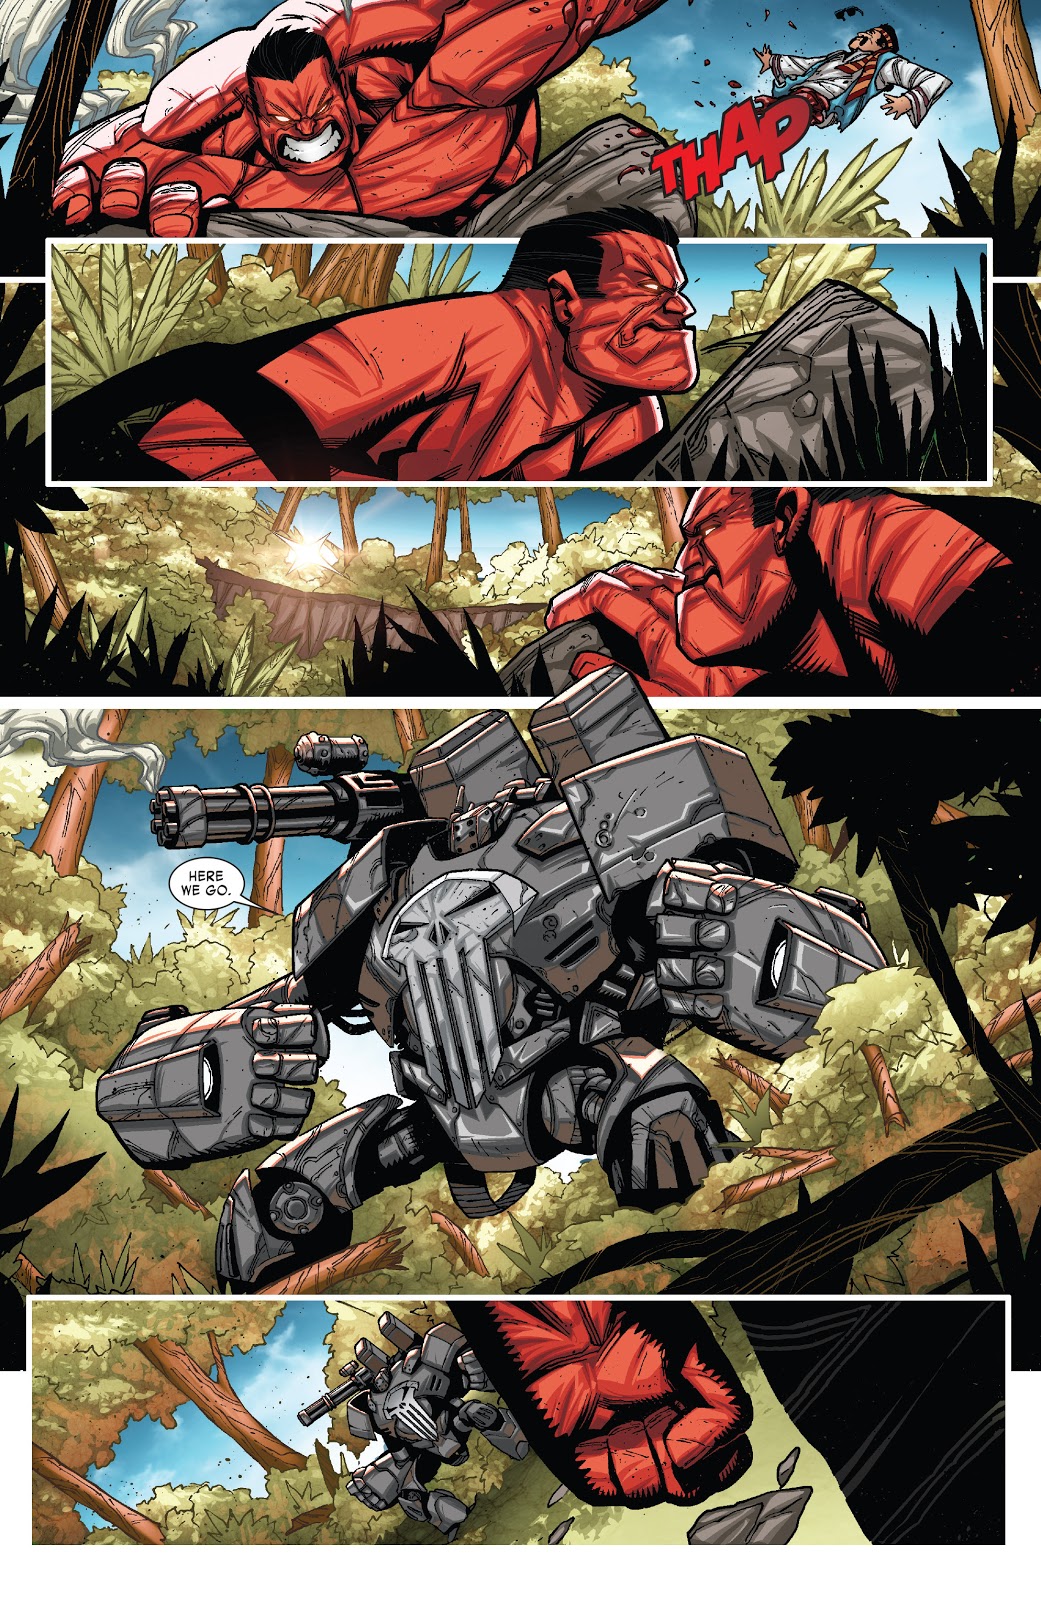 Thunderbolts Punisher vs the Thunderbolts review